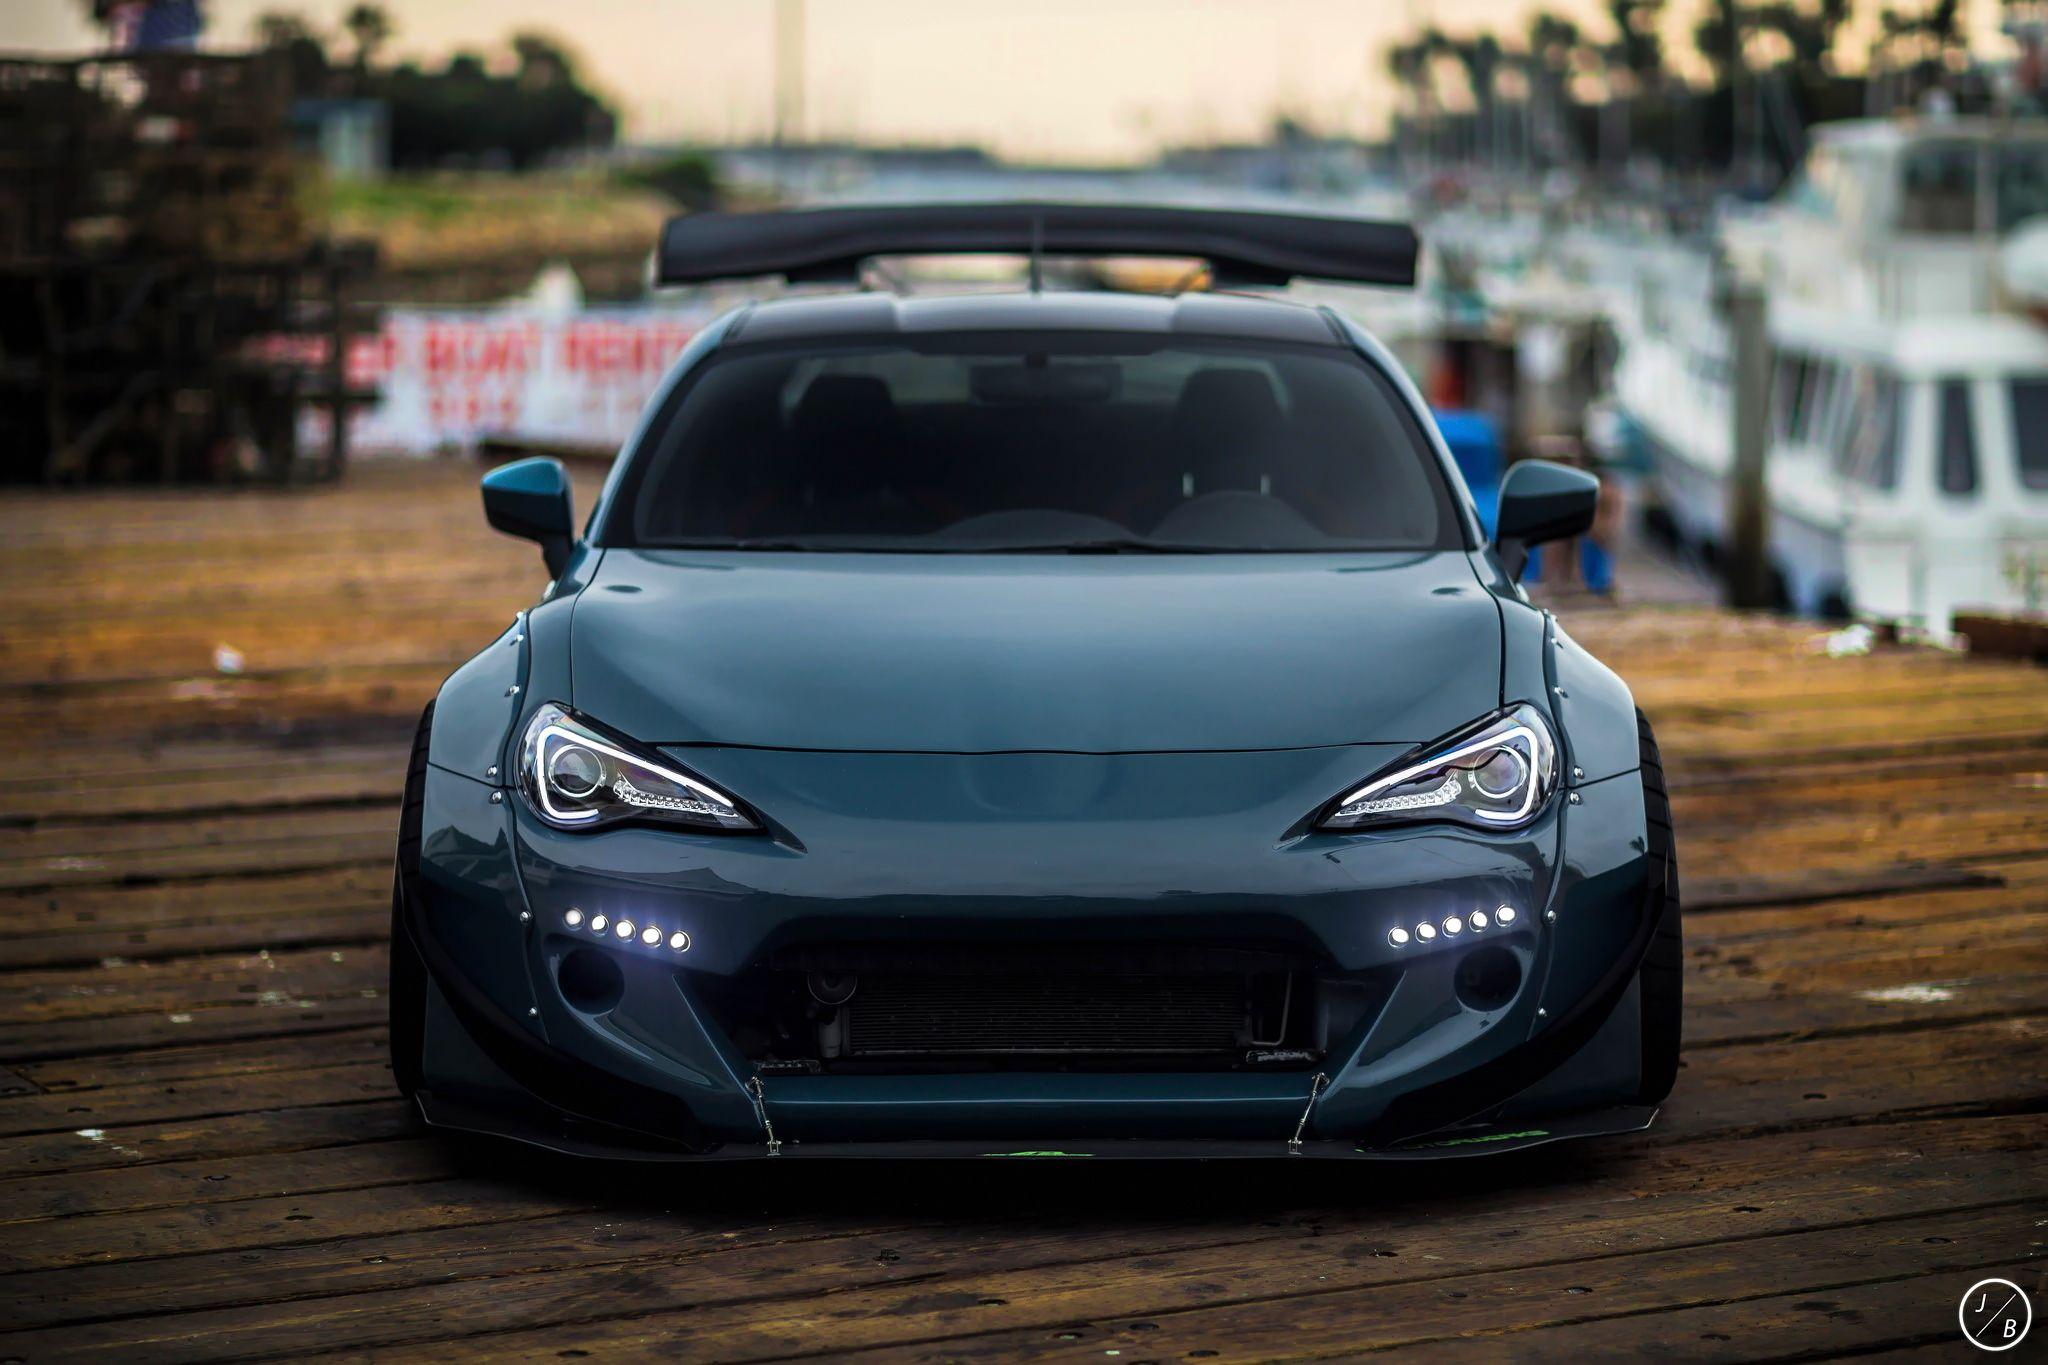 Toyota GT 86 Wallpaper Image Photo Picture Background